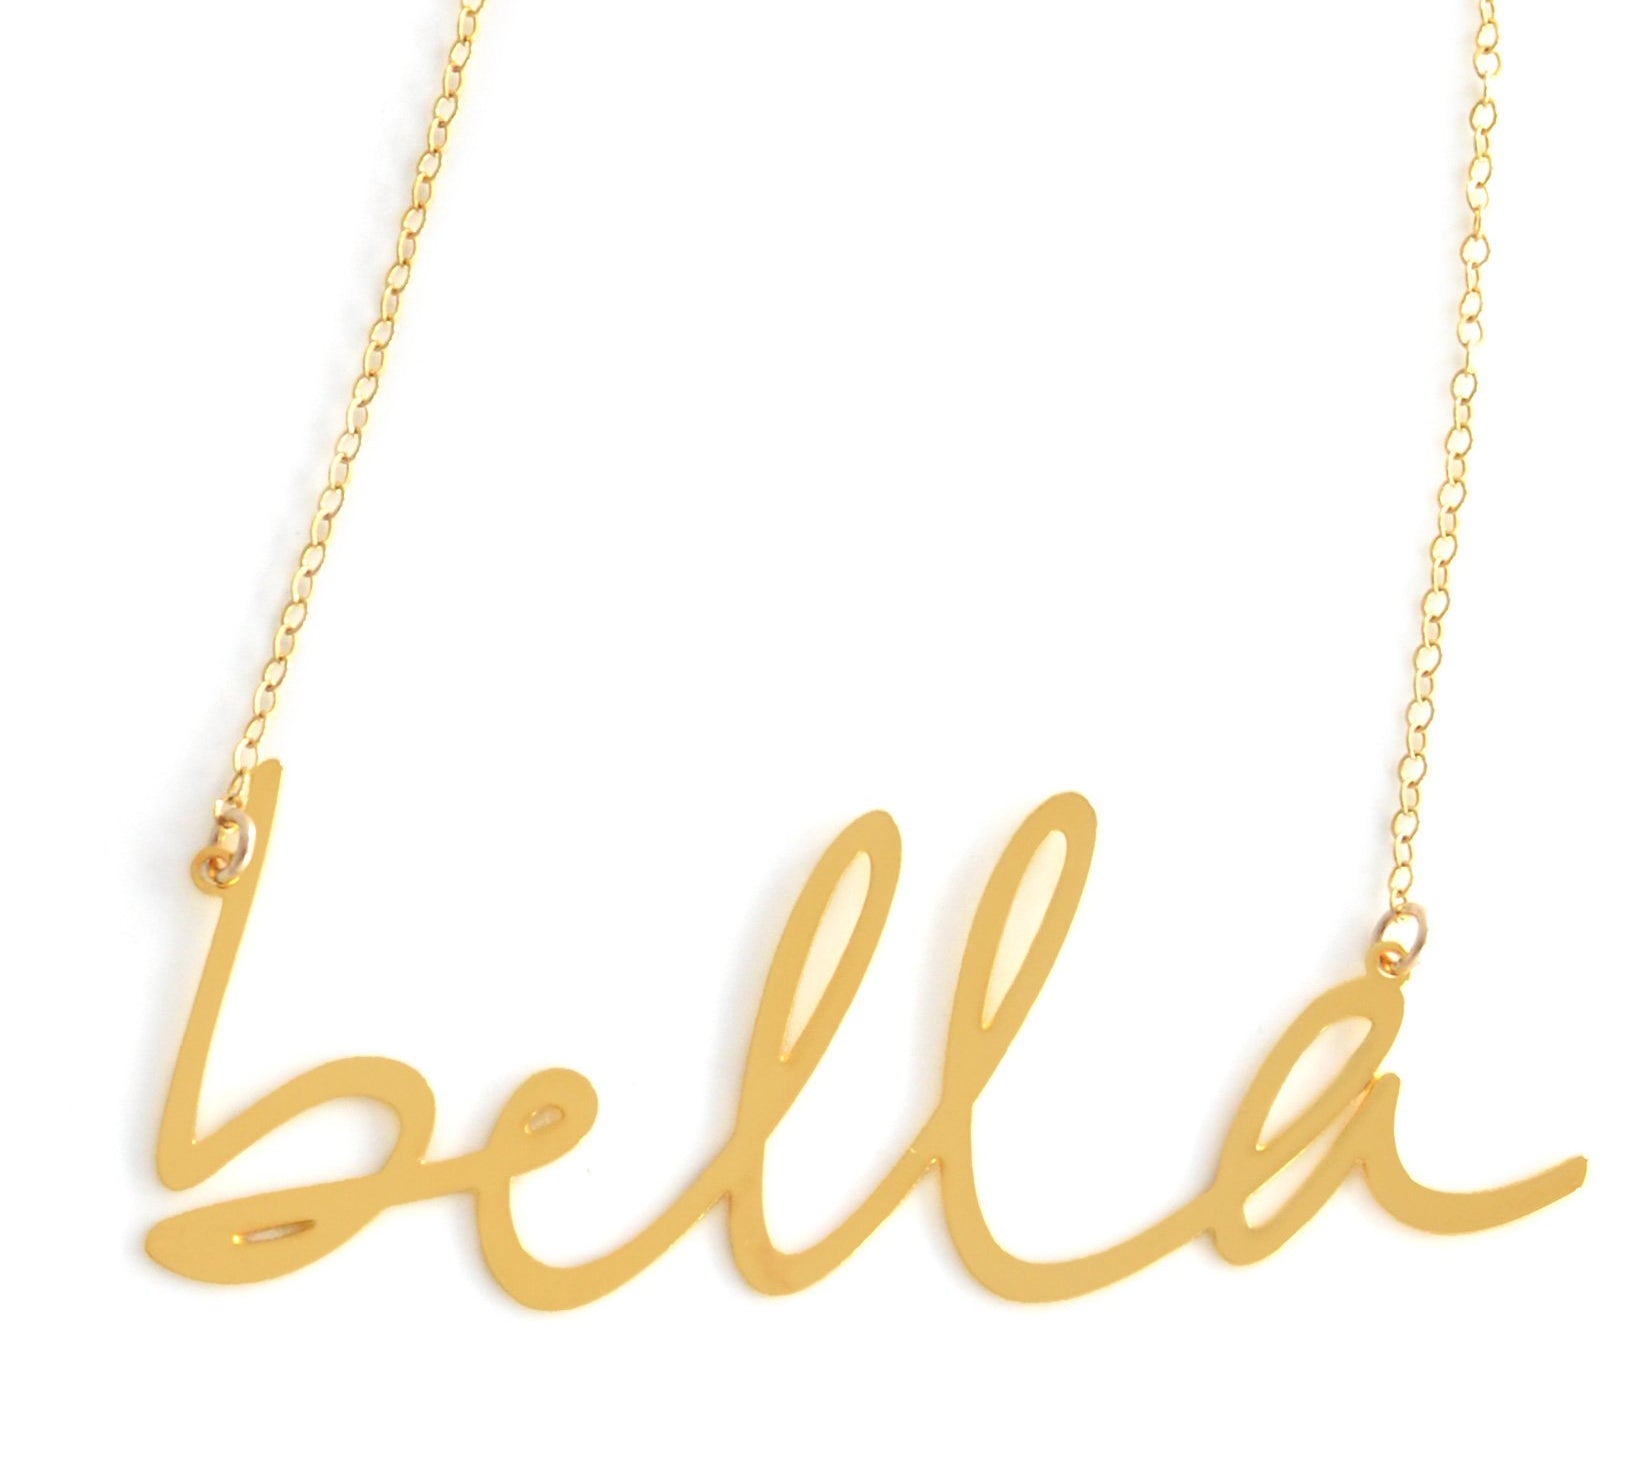 Bella Necklace - High Quality, Affordable, Hand Written, Self Love, Mantra Word Necklace - Available in Gold and Silver - Small and Large Sizes - Made in USA - Brevity Jewelry